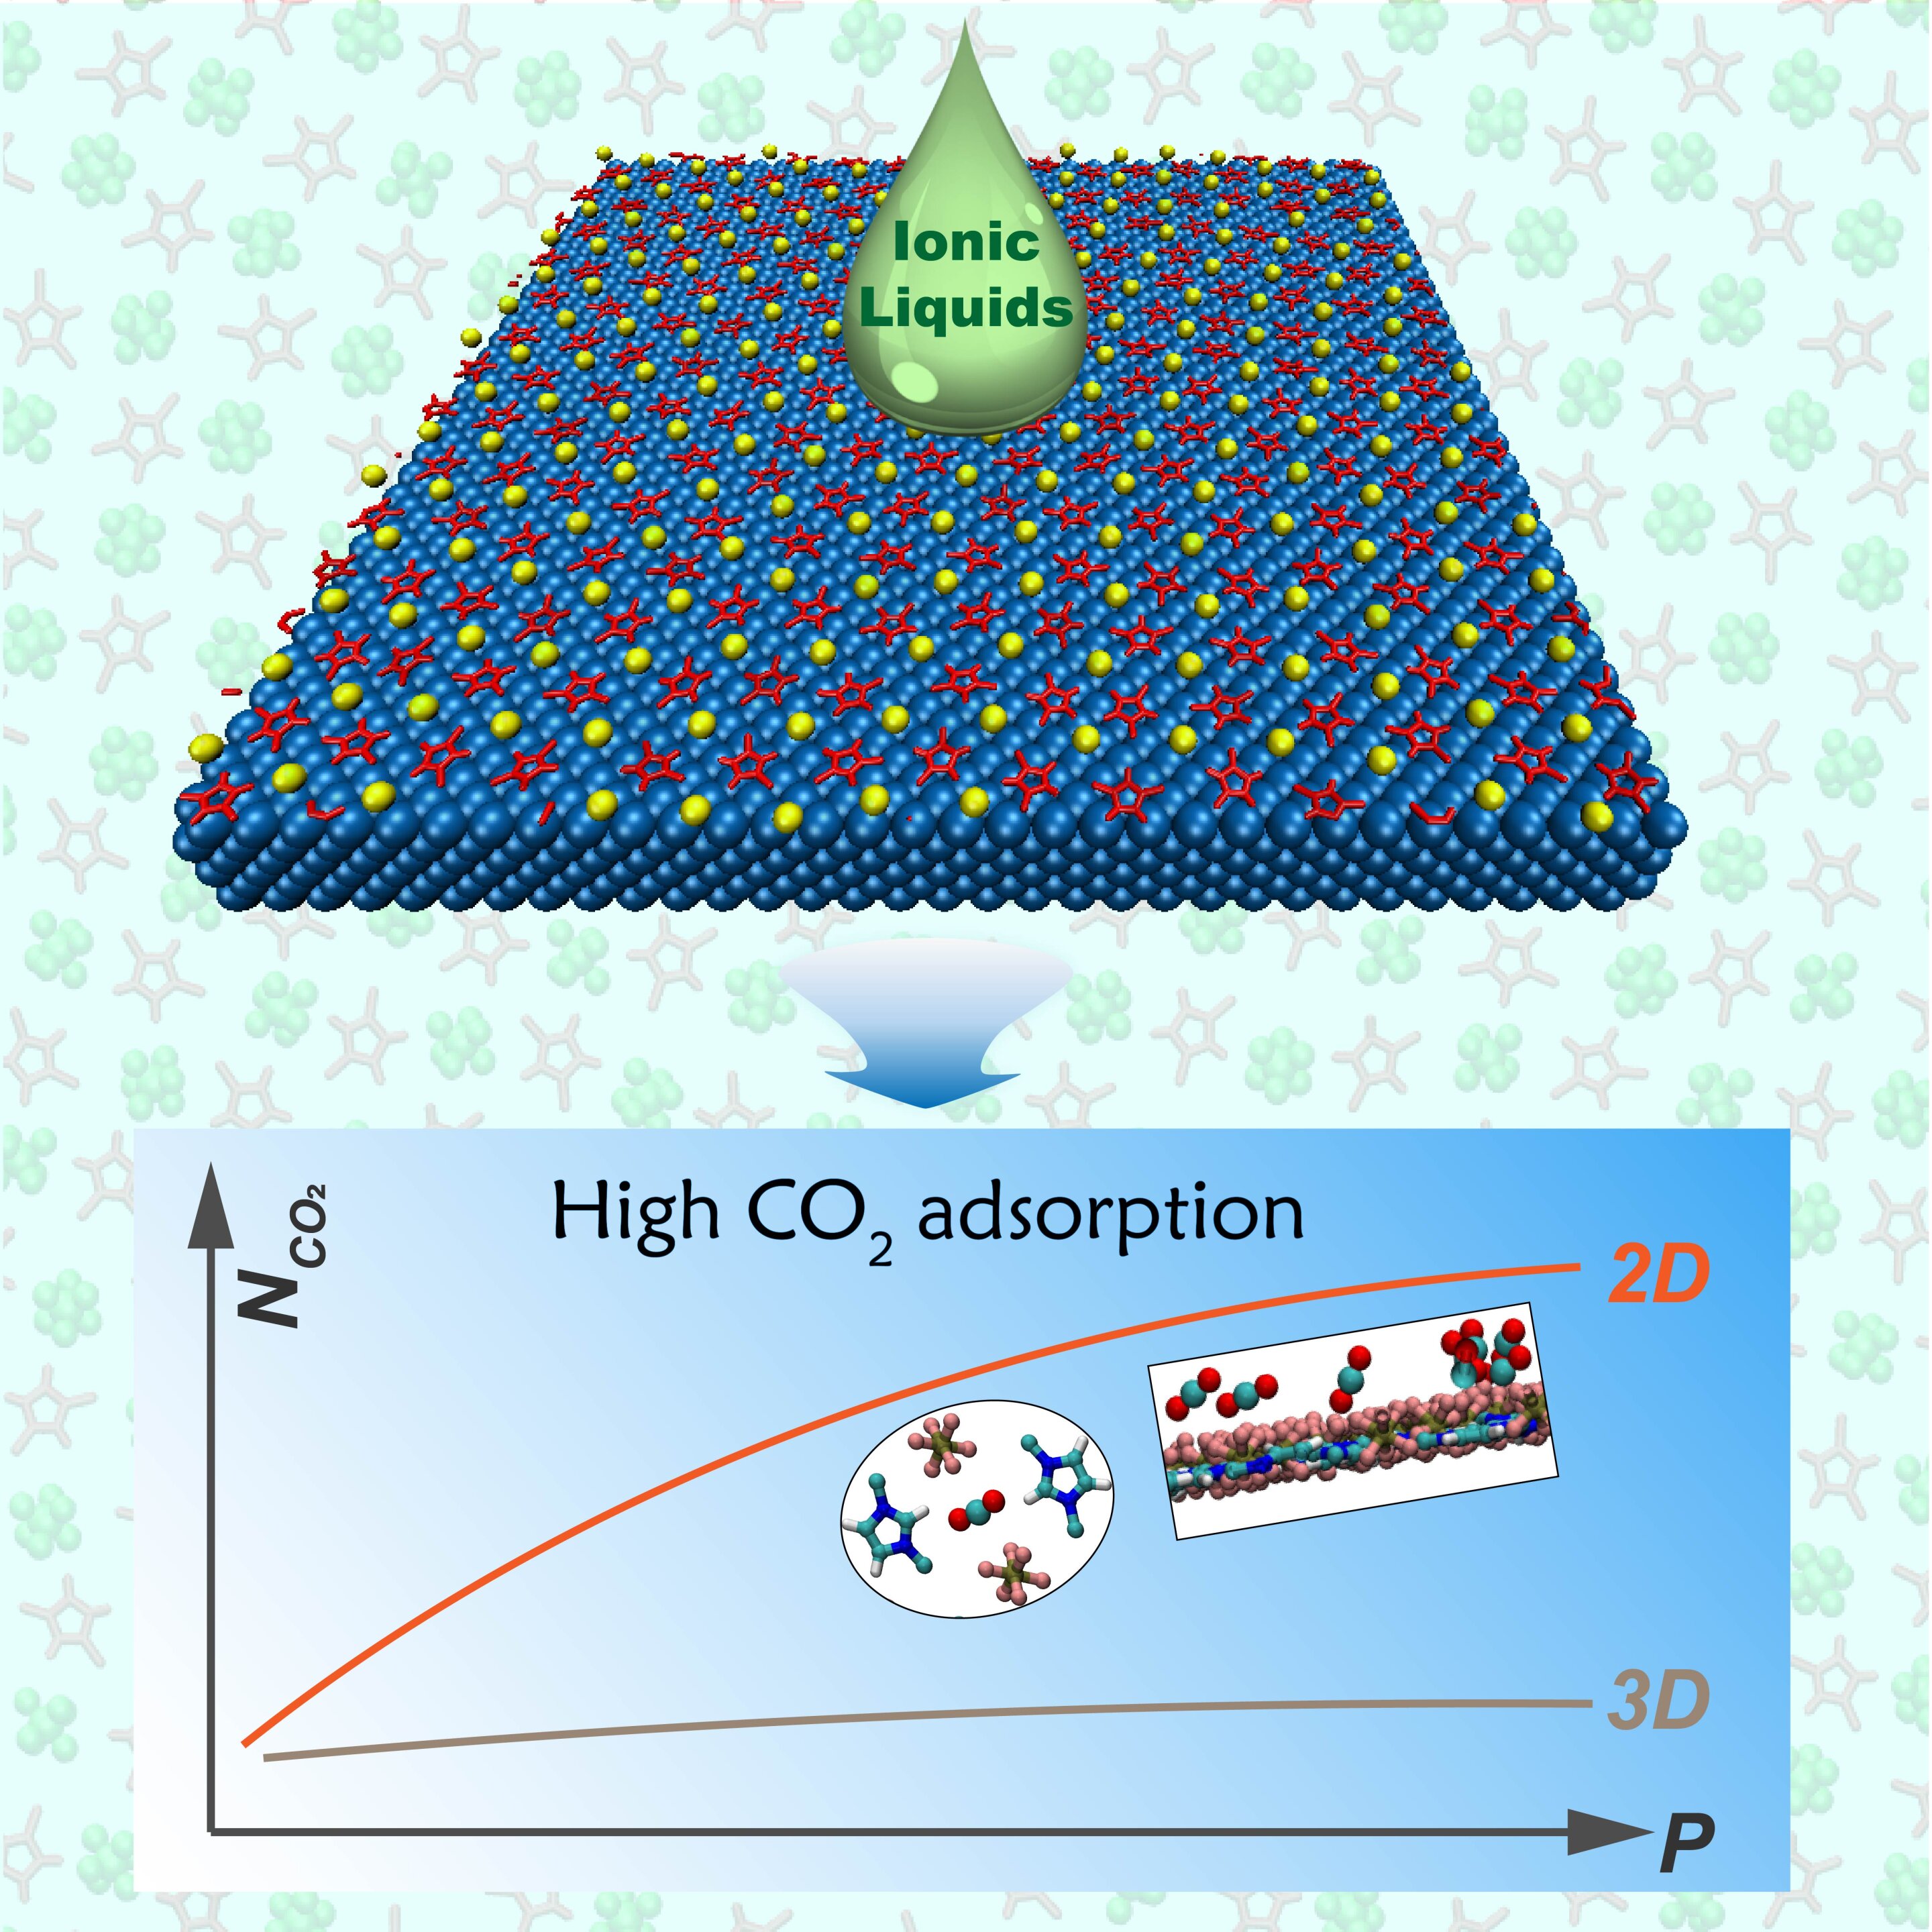 Two-dimensional ionic liquids to effectively capture carbon dioxide